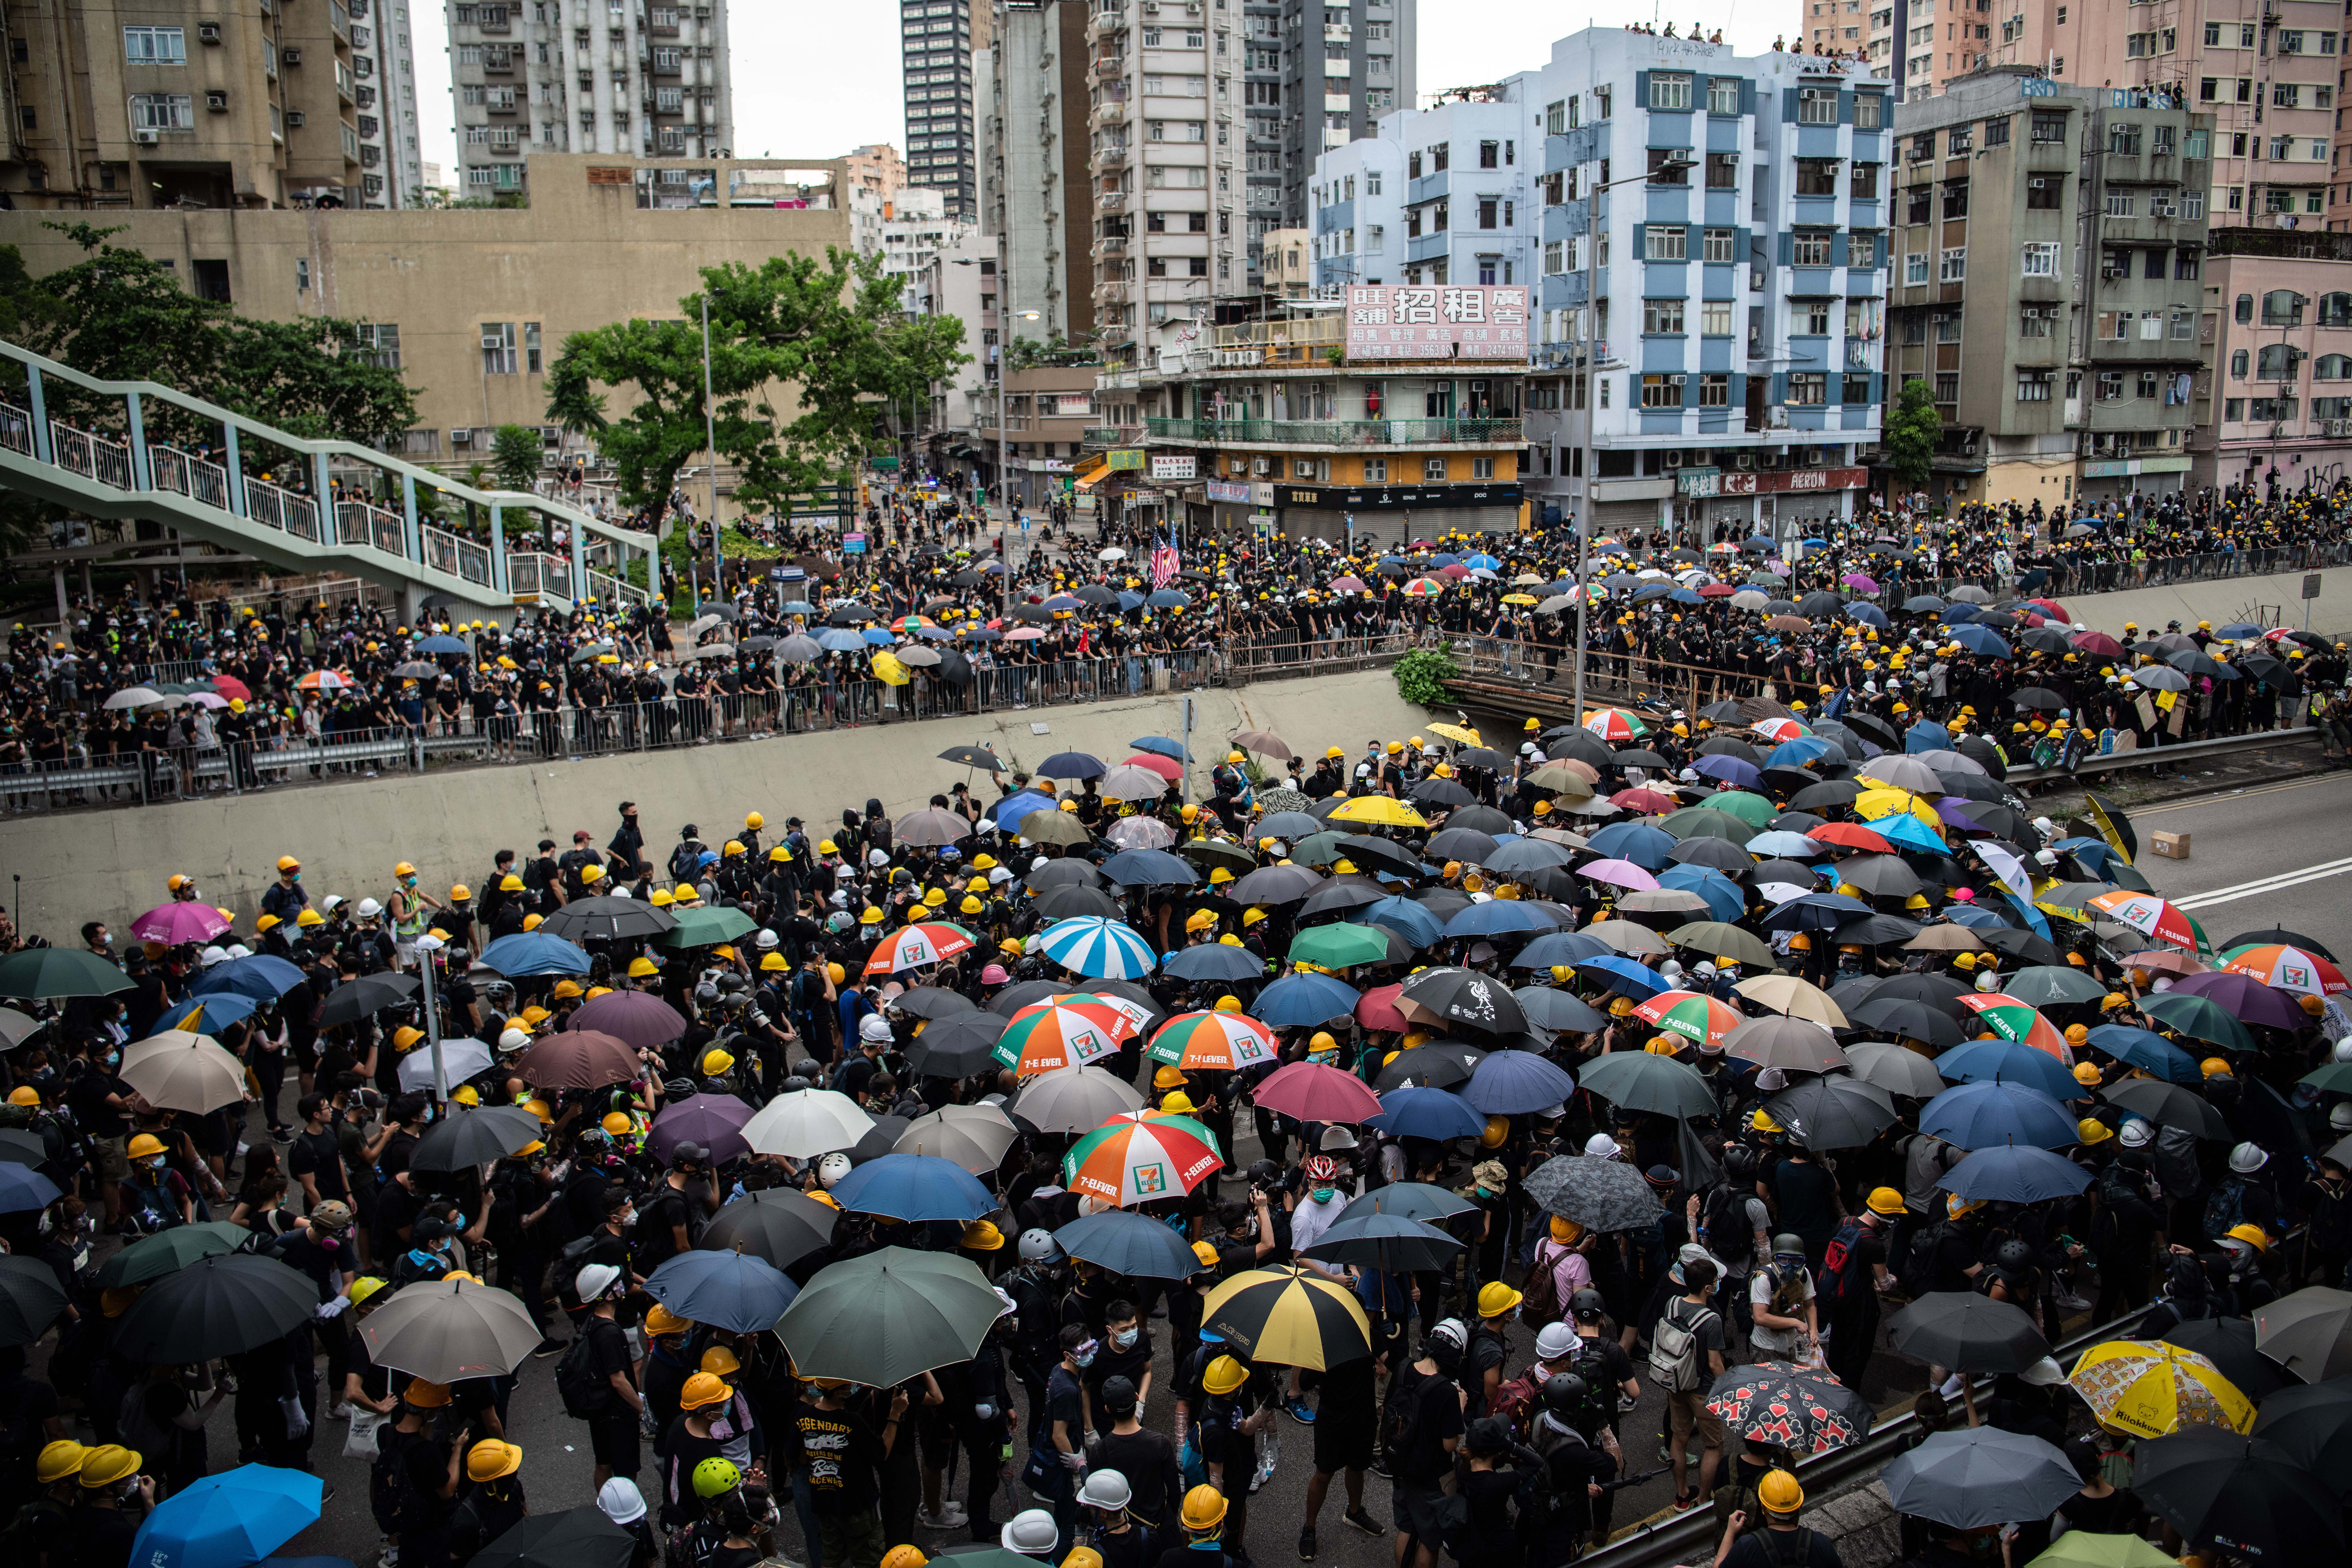 Protest live updates: Riot police face off with protesters in Hong Kong ...